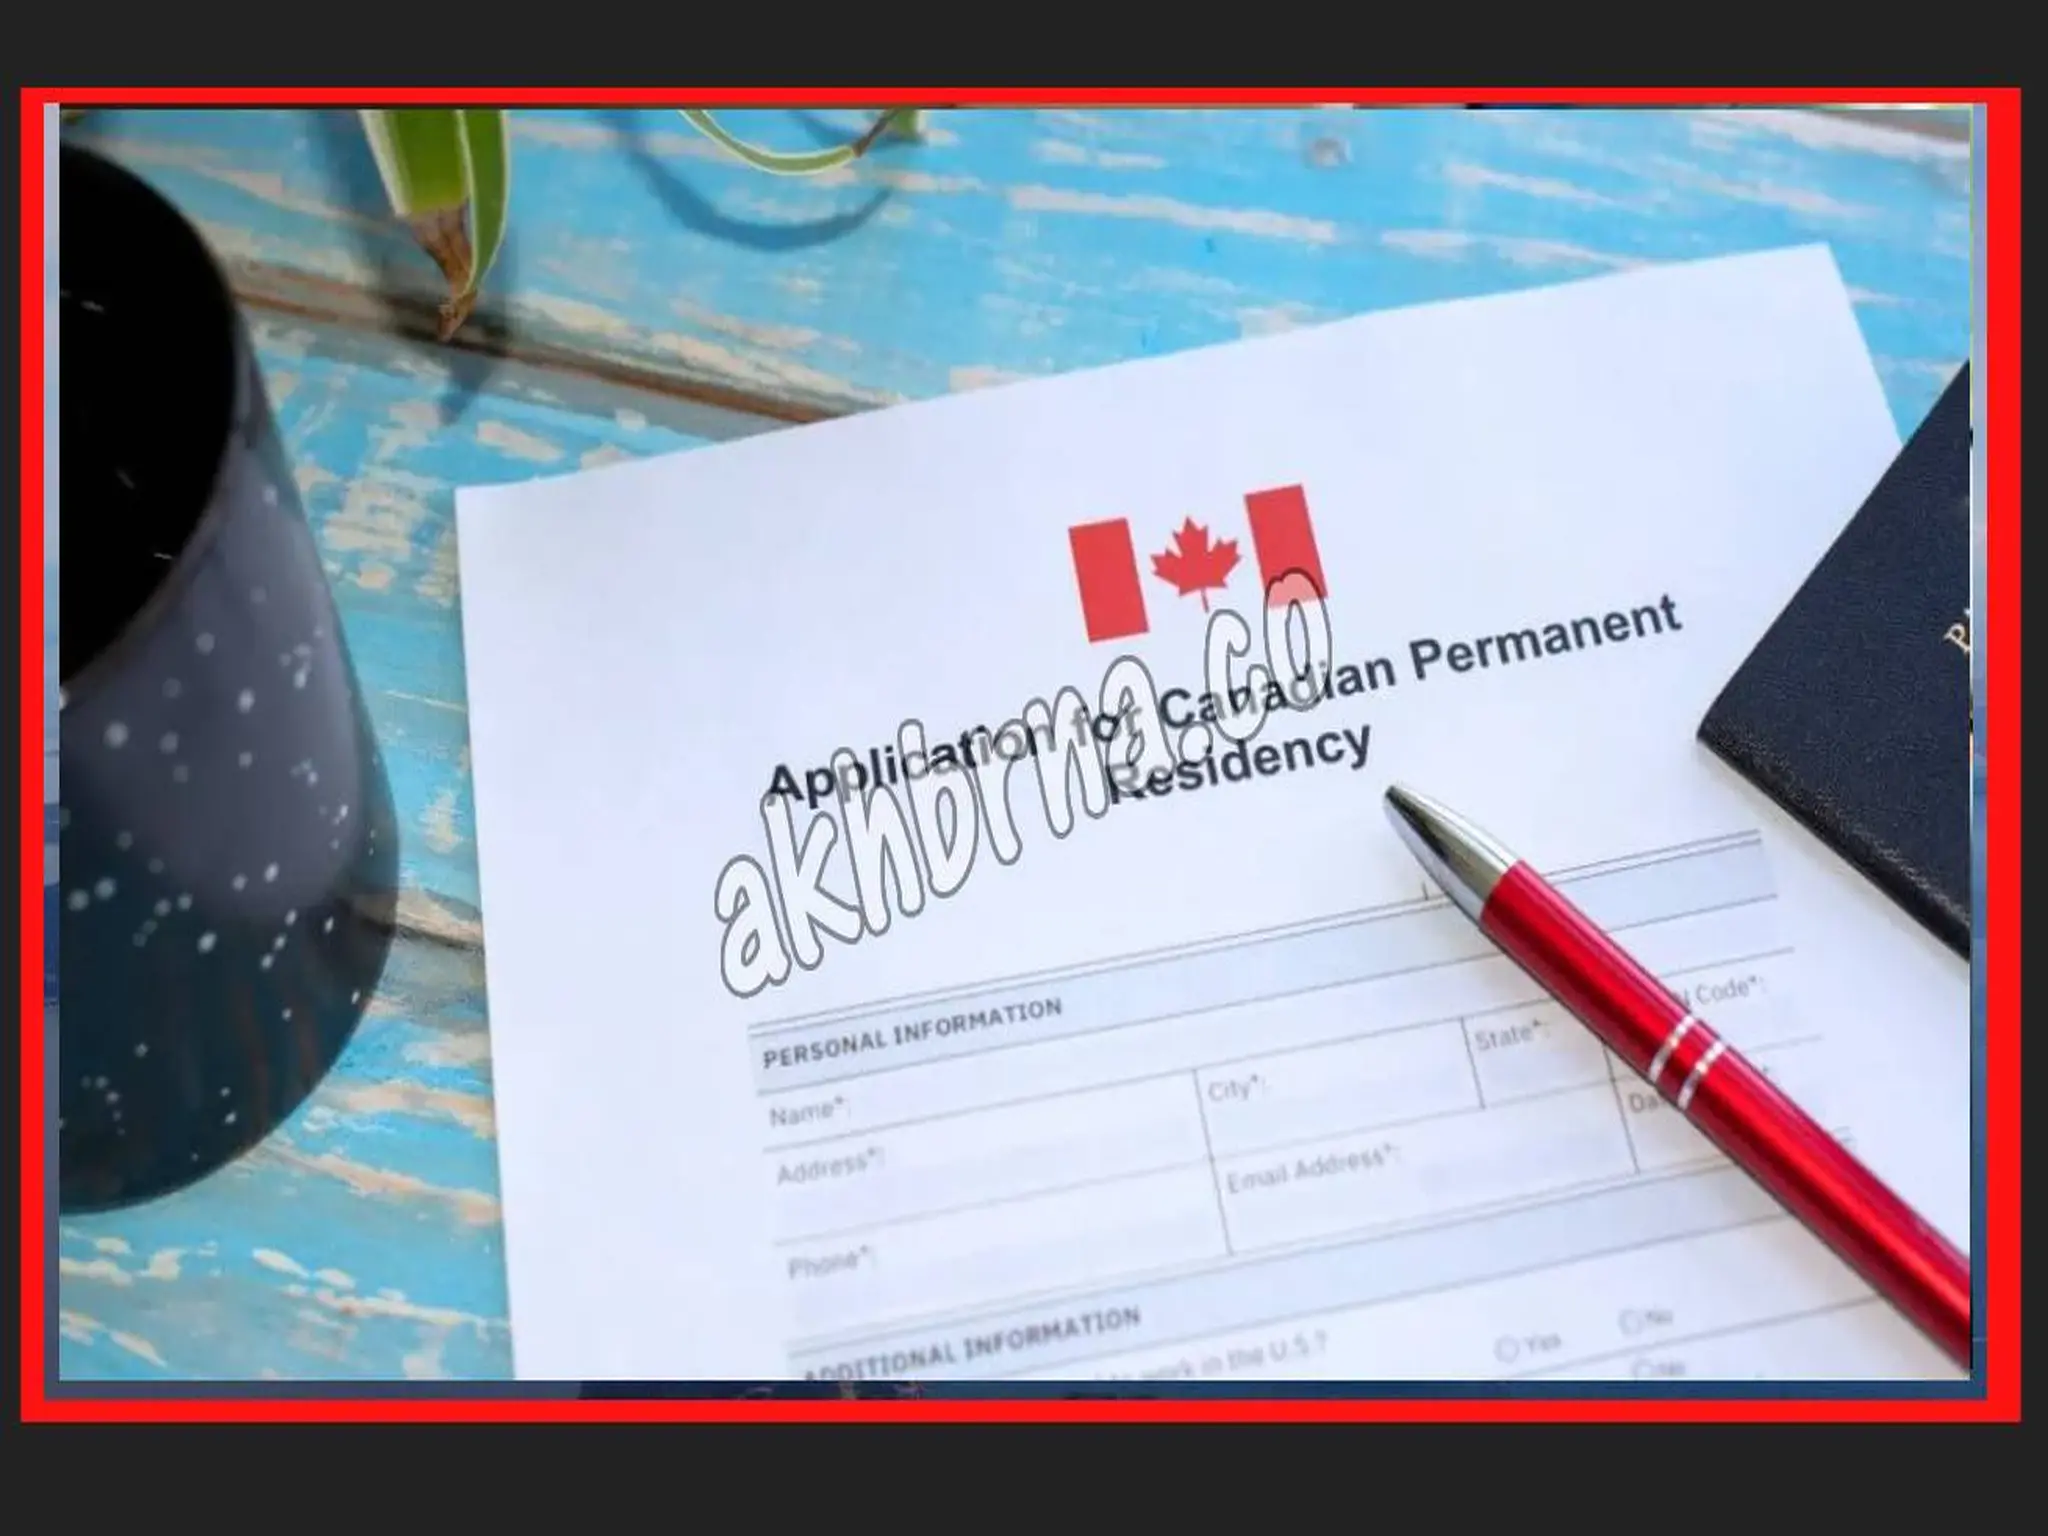 How to Apply for Permanent Residency in Ontario, Canada